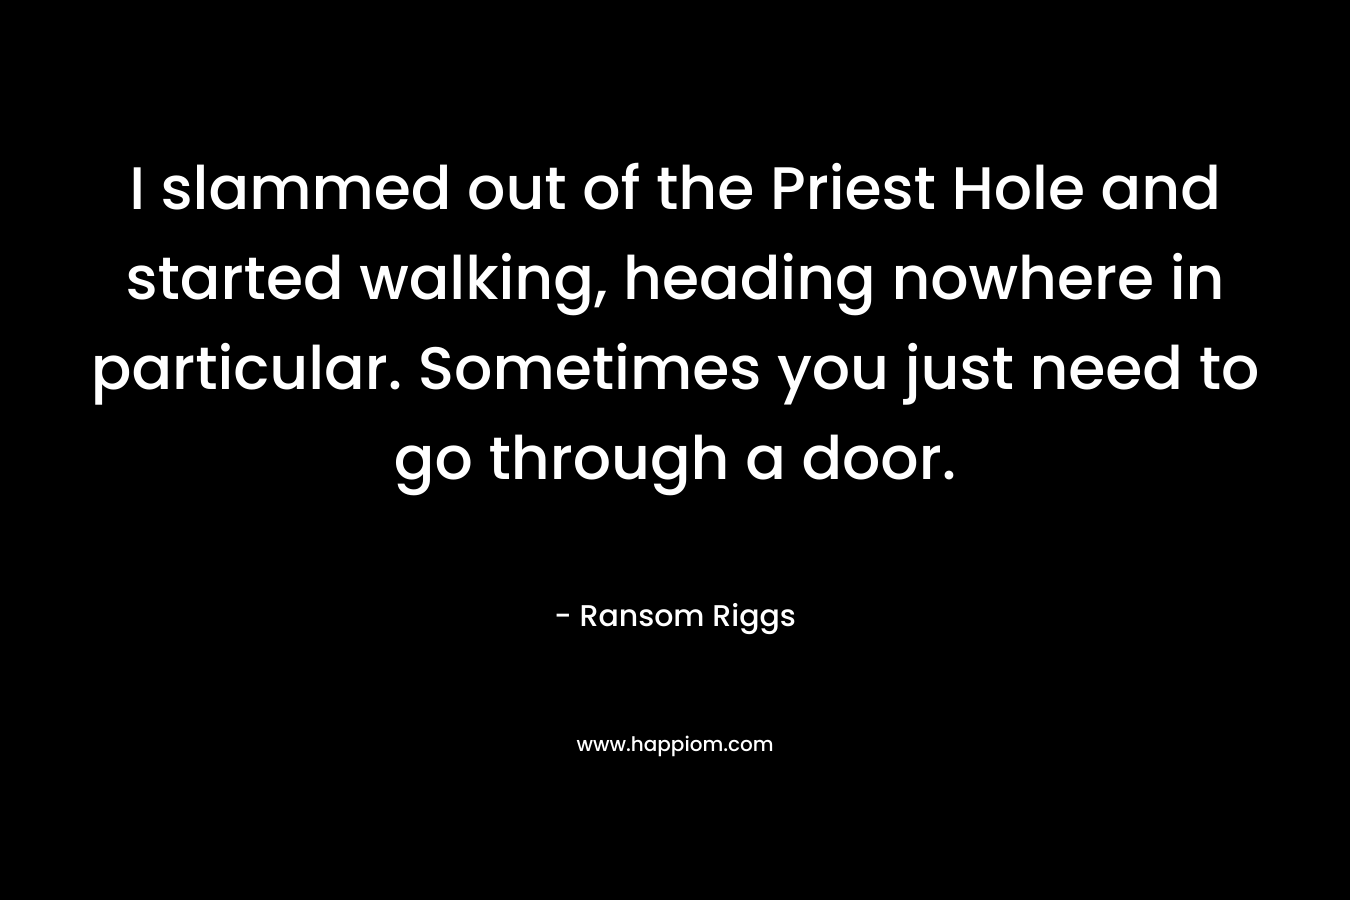 I slammed out of the Priest Hole and started walking, heading nowhere in particular. Sometimes you just need to go through a door. – Ransom Riggs